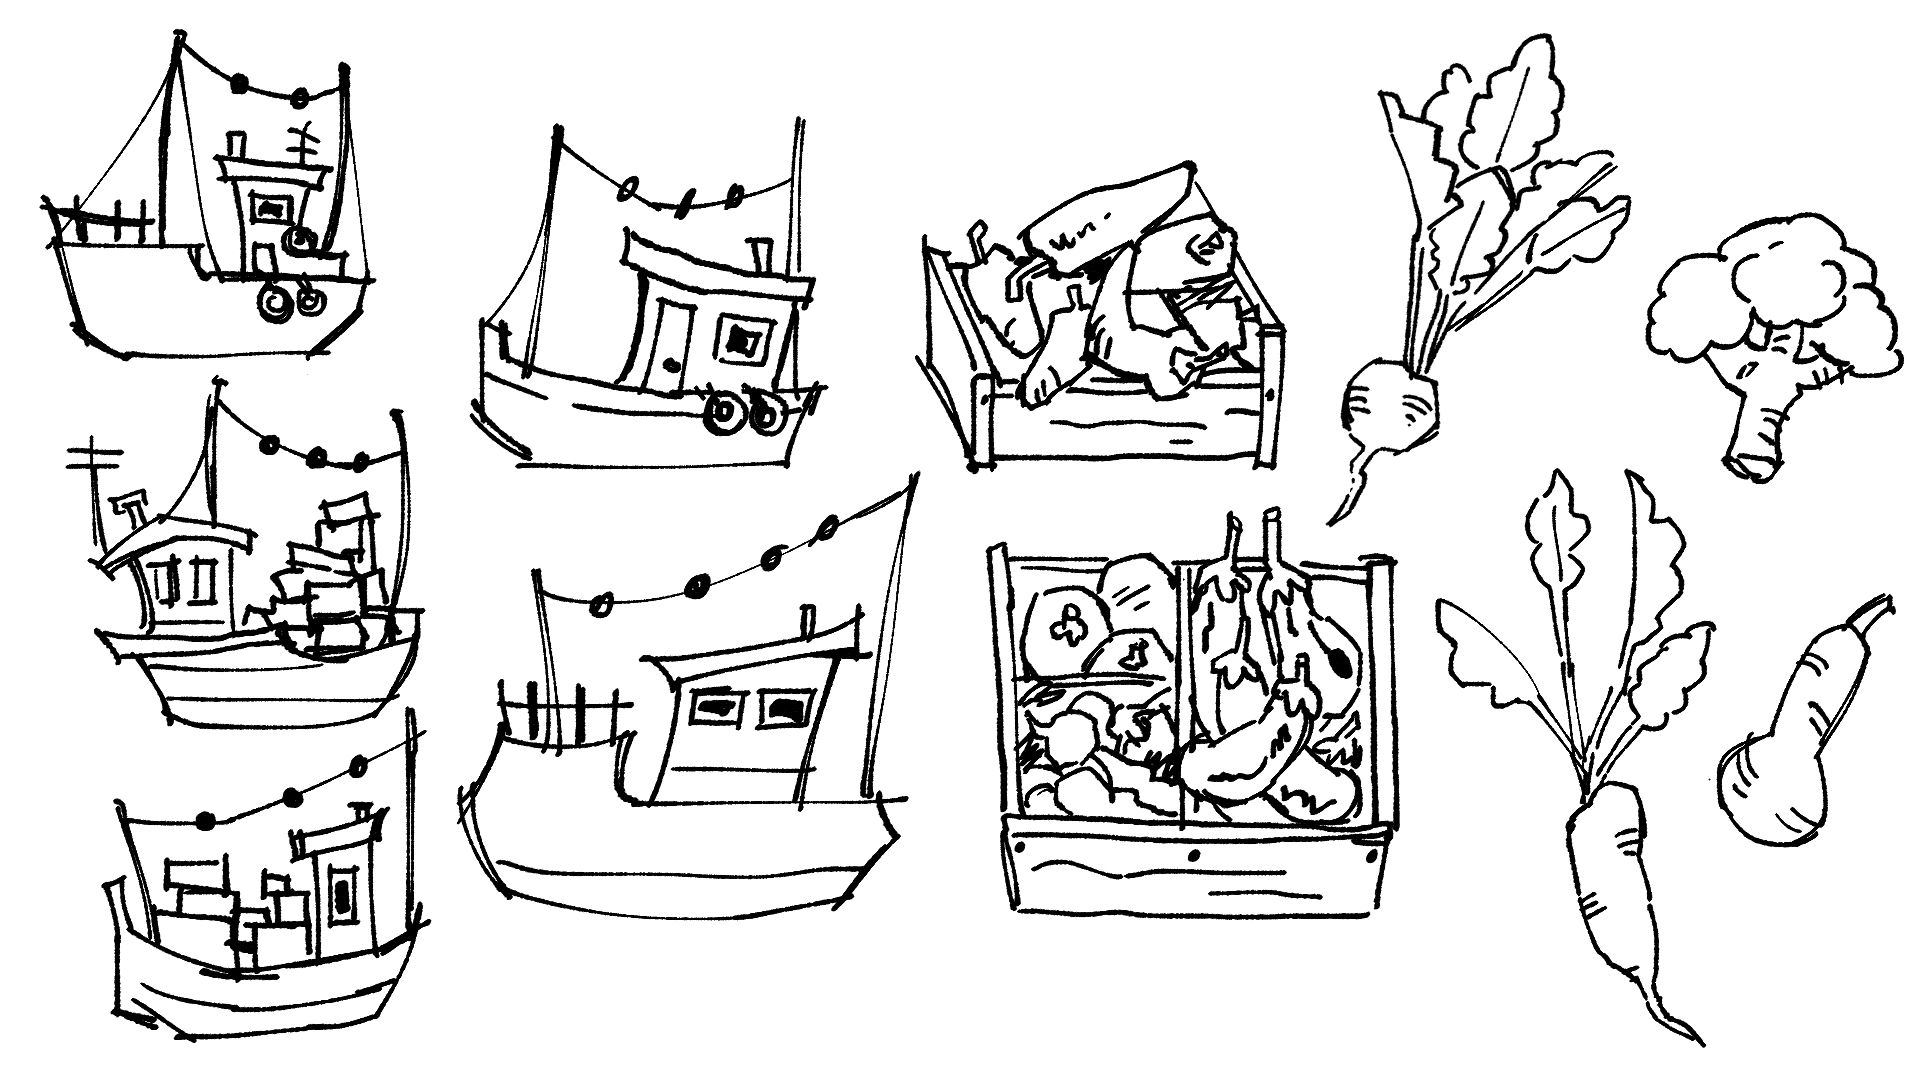 Boats and Market Props